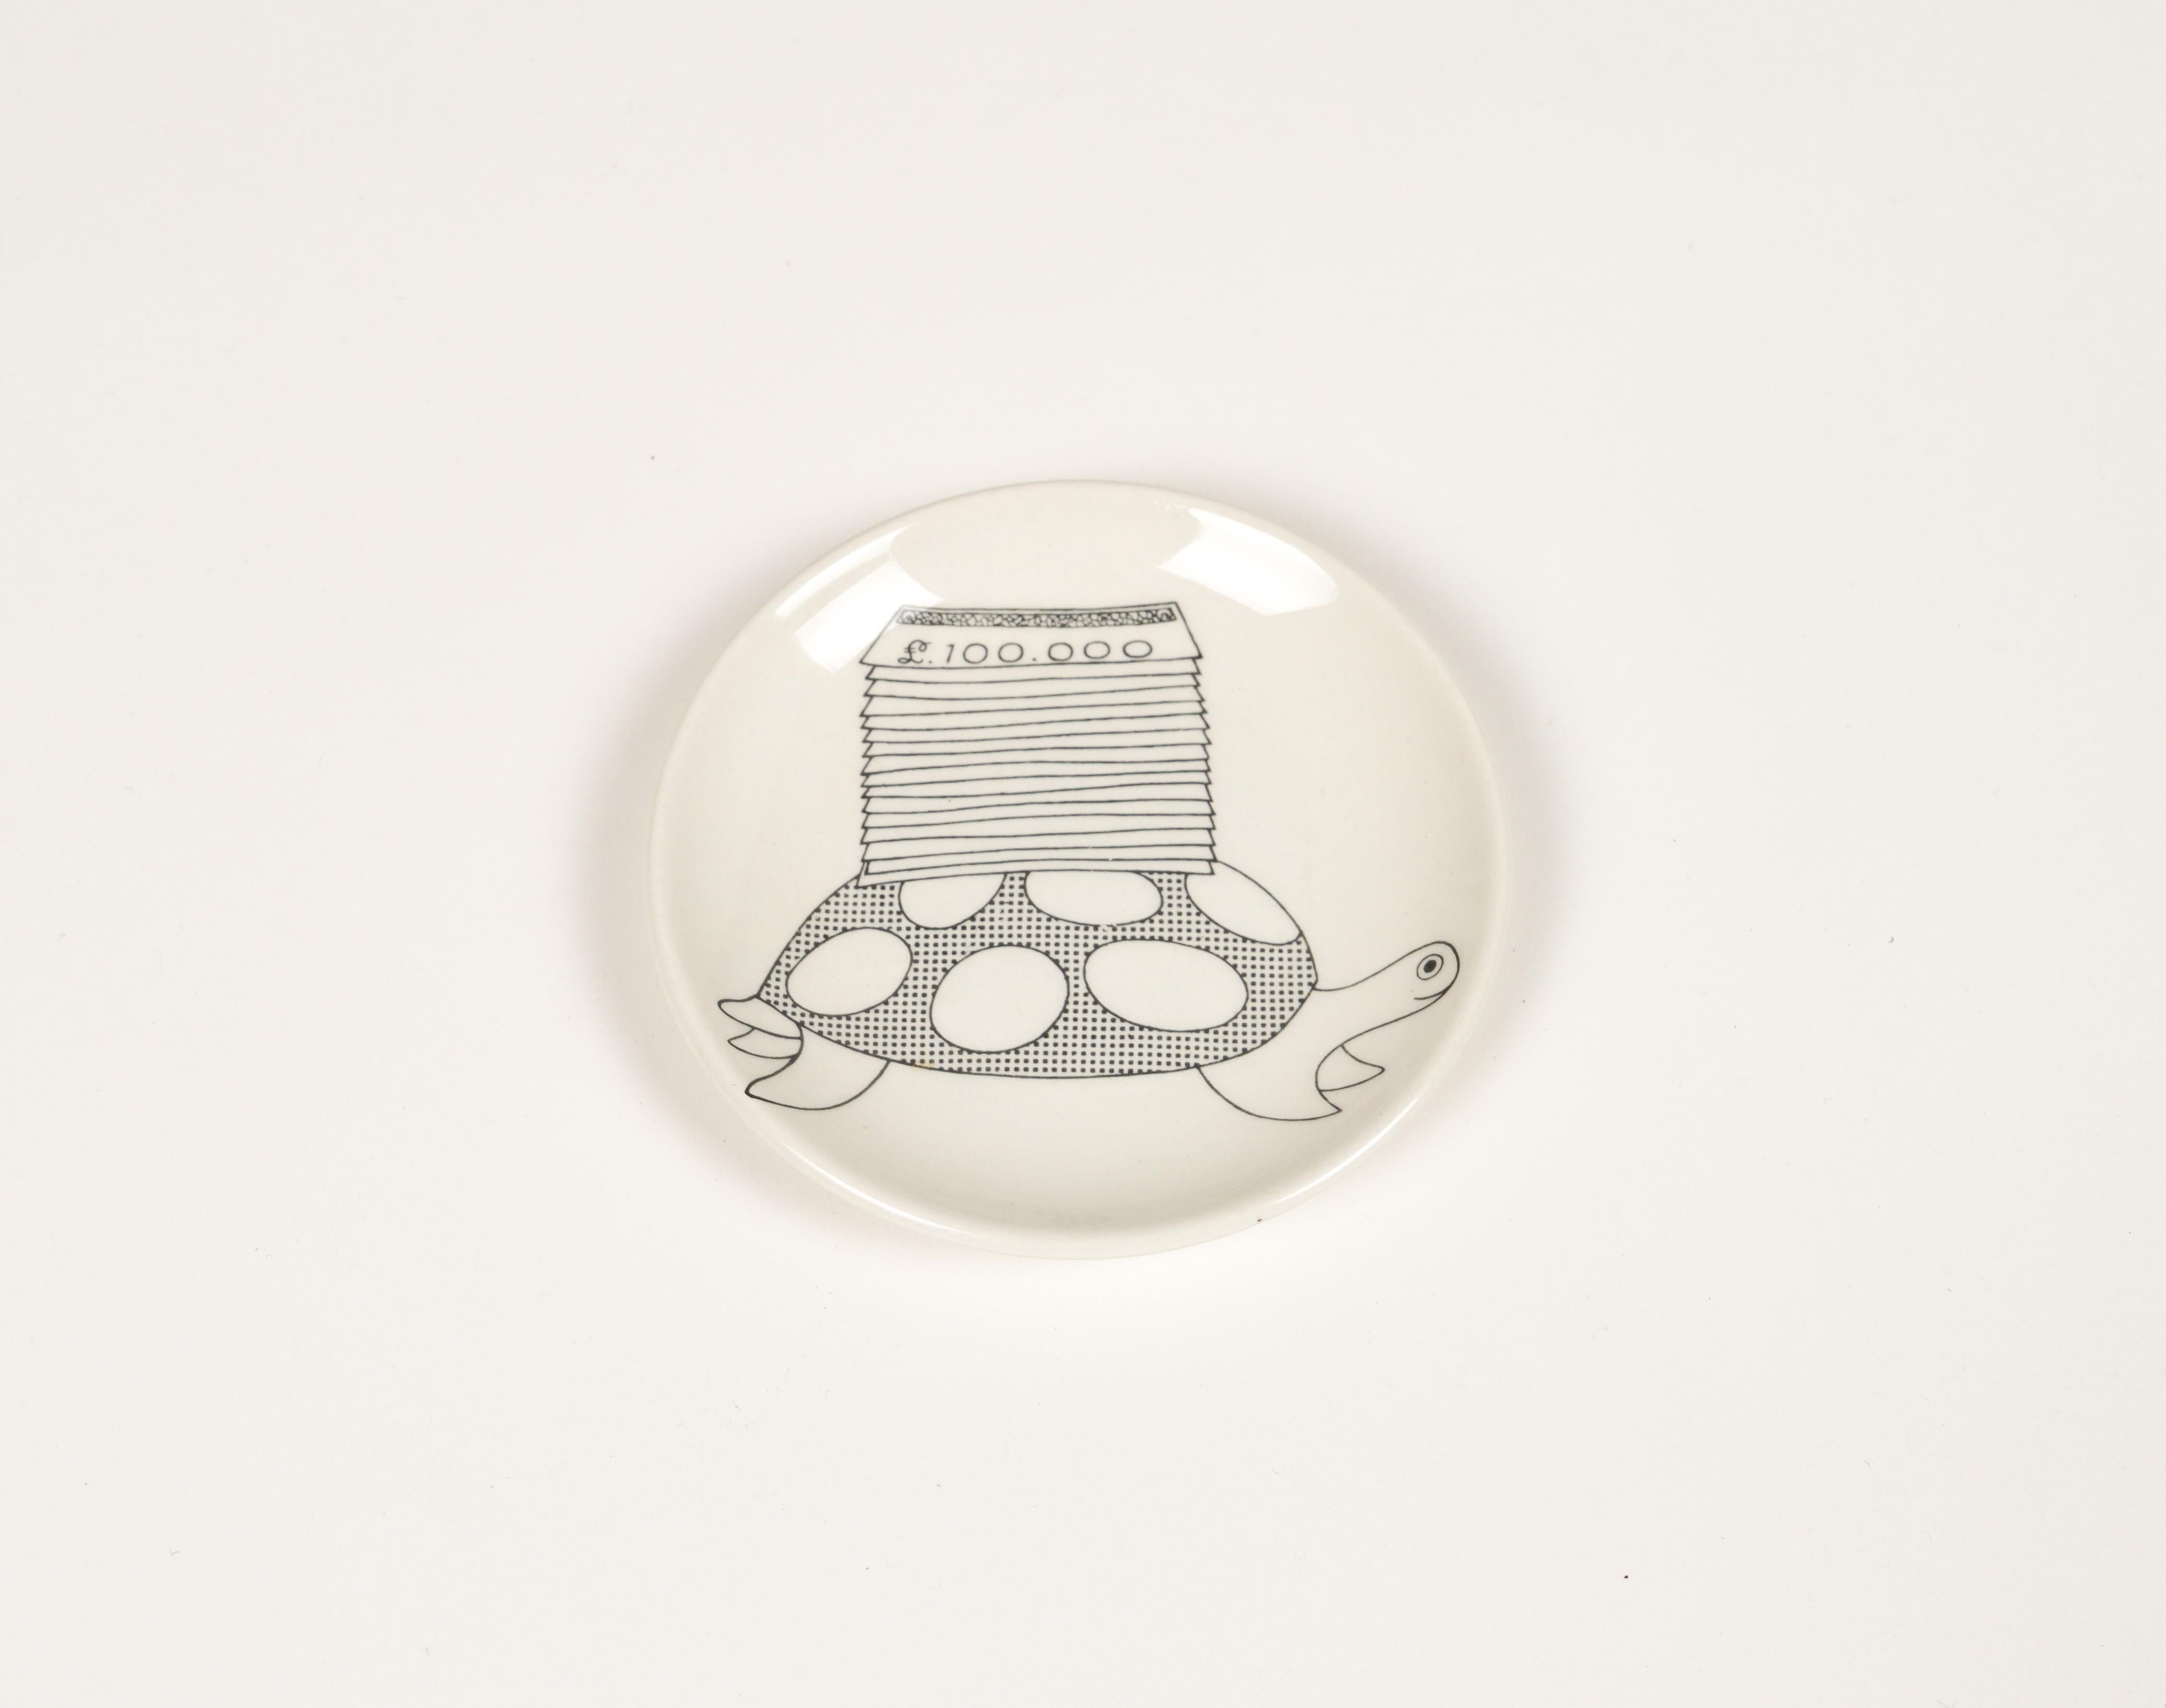 Set of 5 Small Plate or Coasters in Porcelain by Piero Fornasetti, Italy 1950s For Sale 2